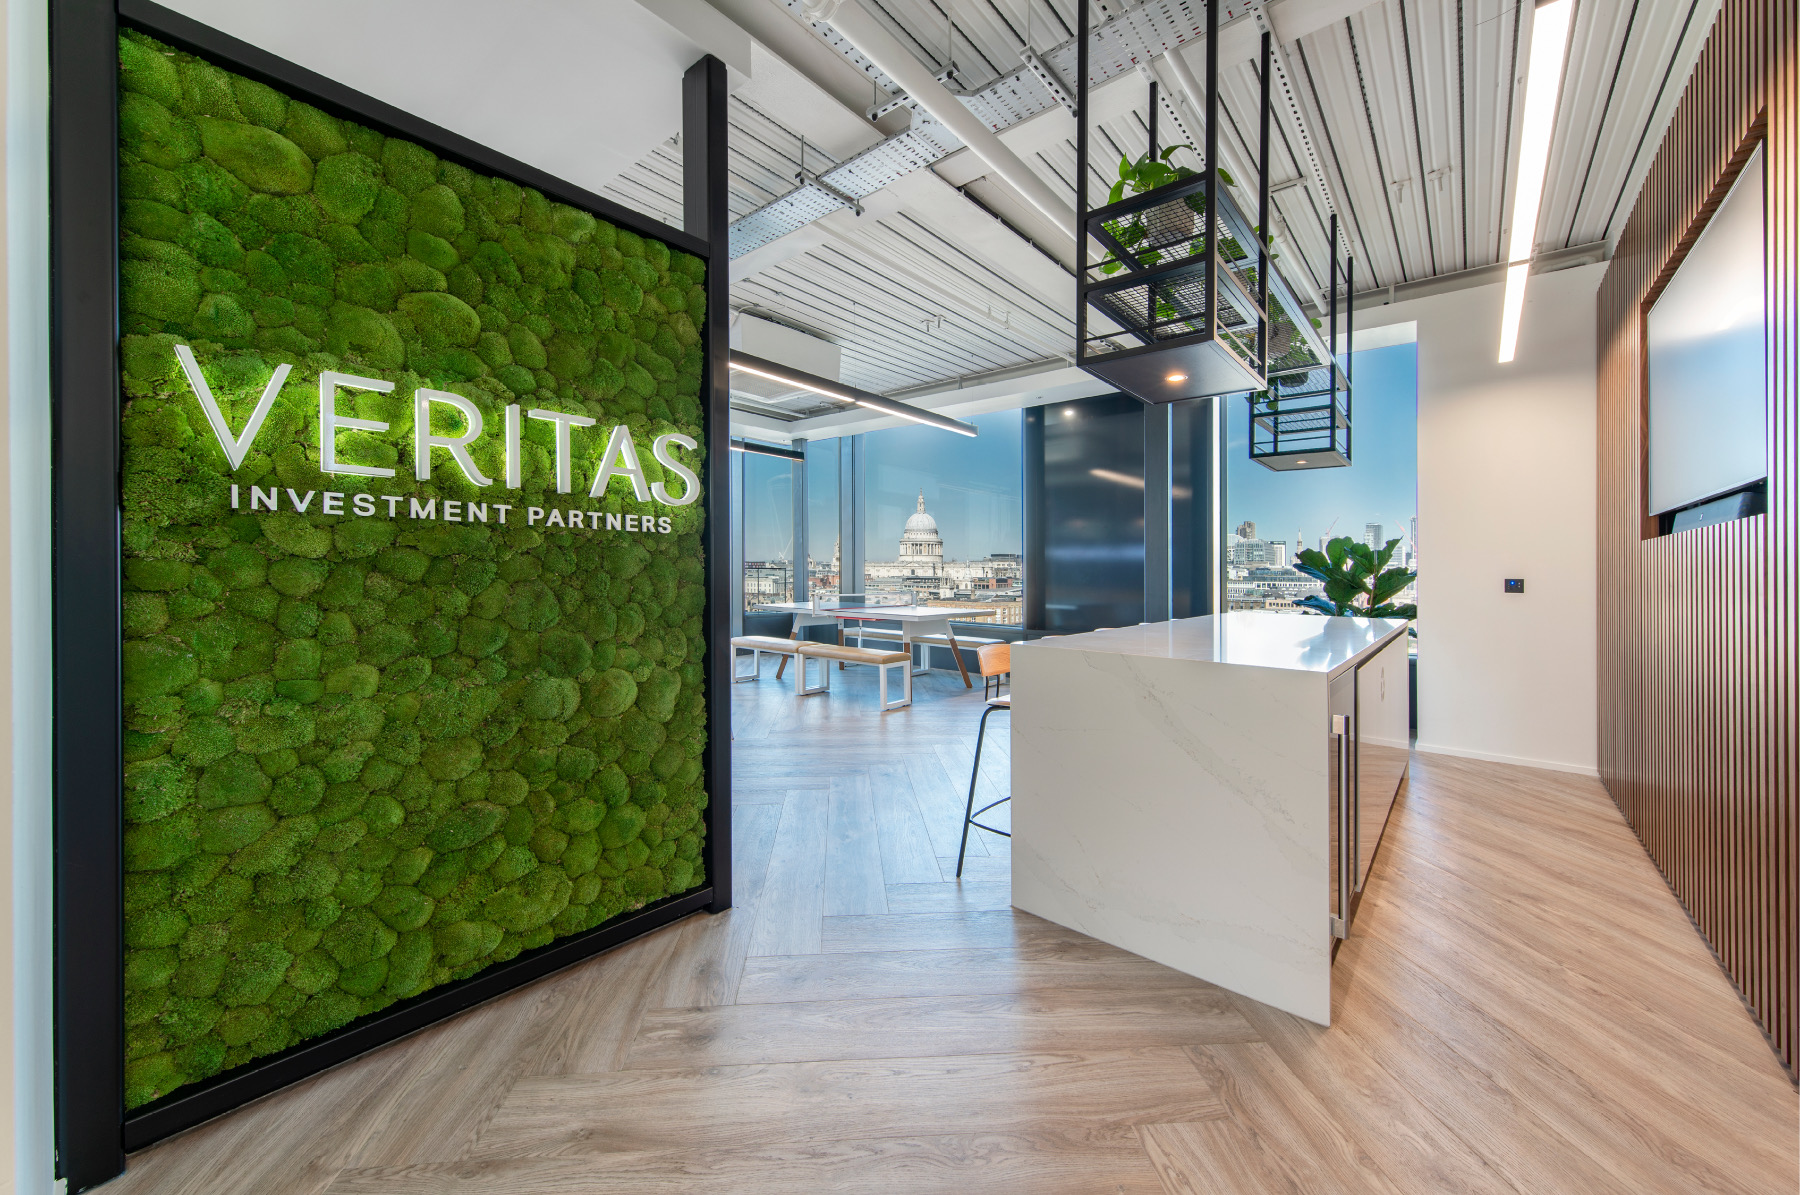 A Look Inside Veritas Investment Partners’ New London Office